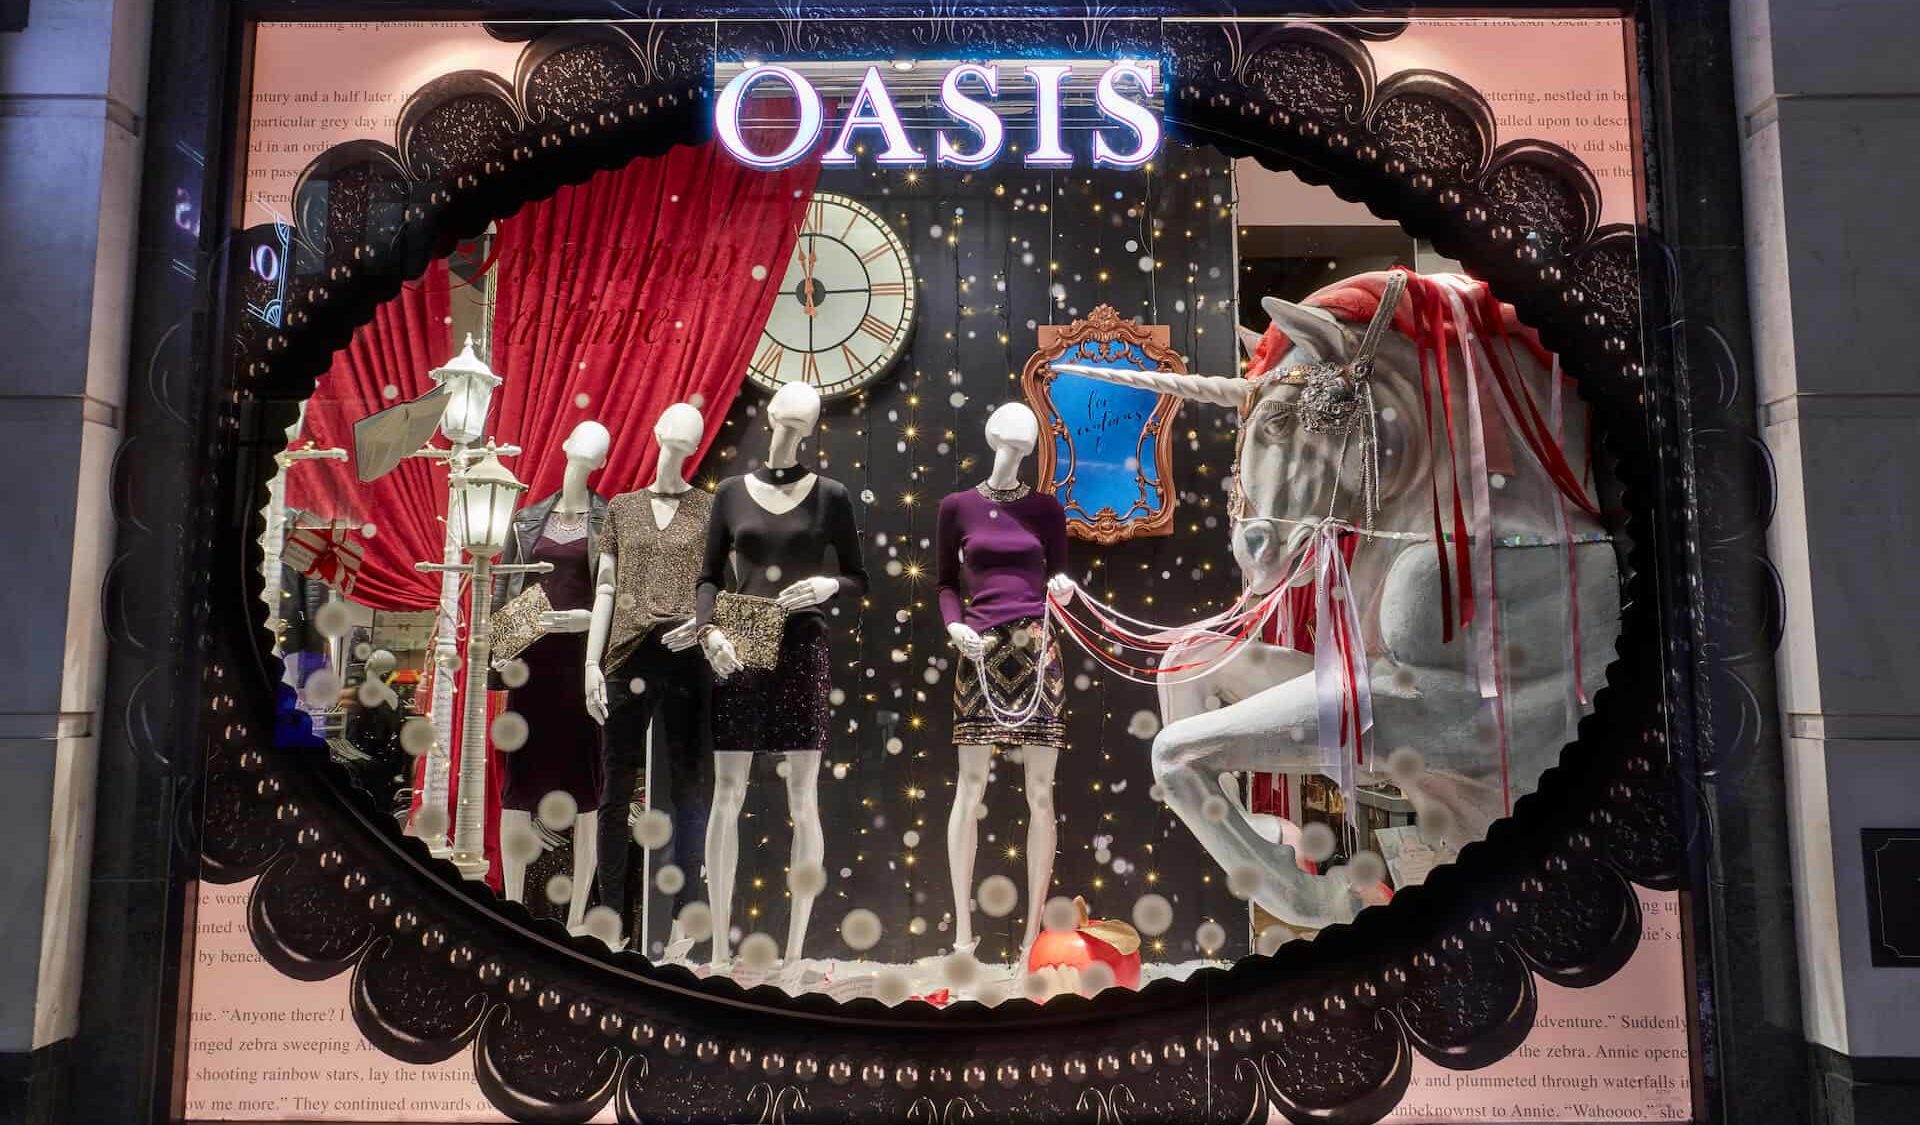 Oasis makes shopping social with VIP Social Boutique